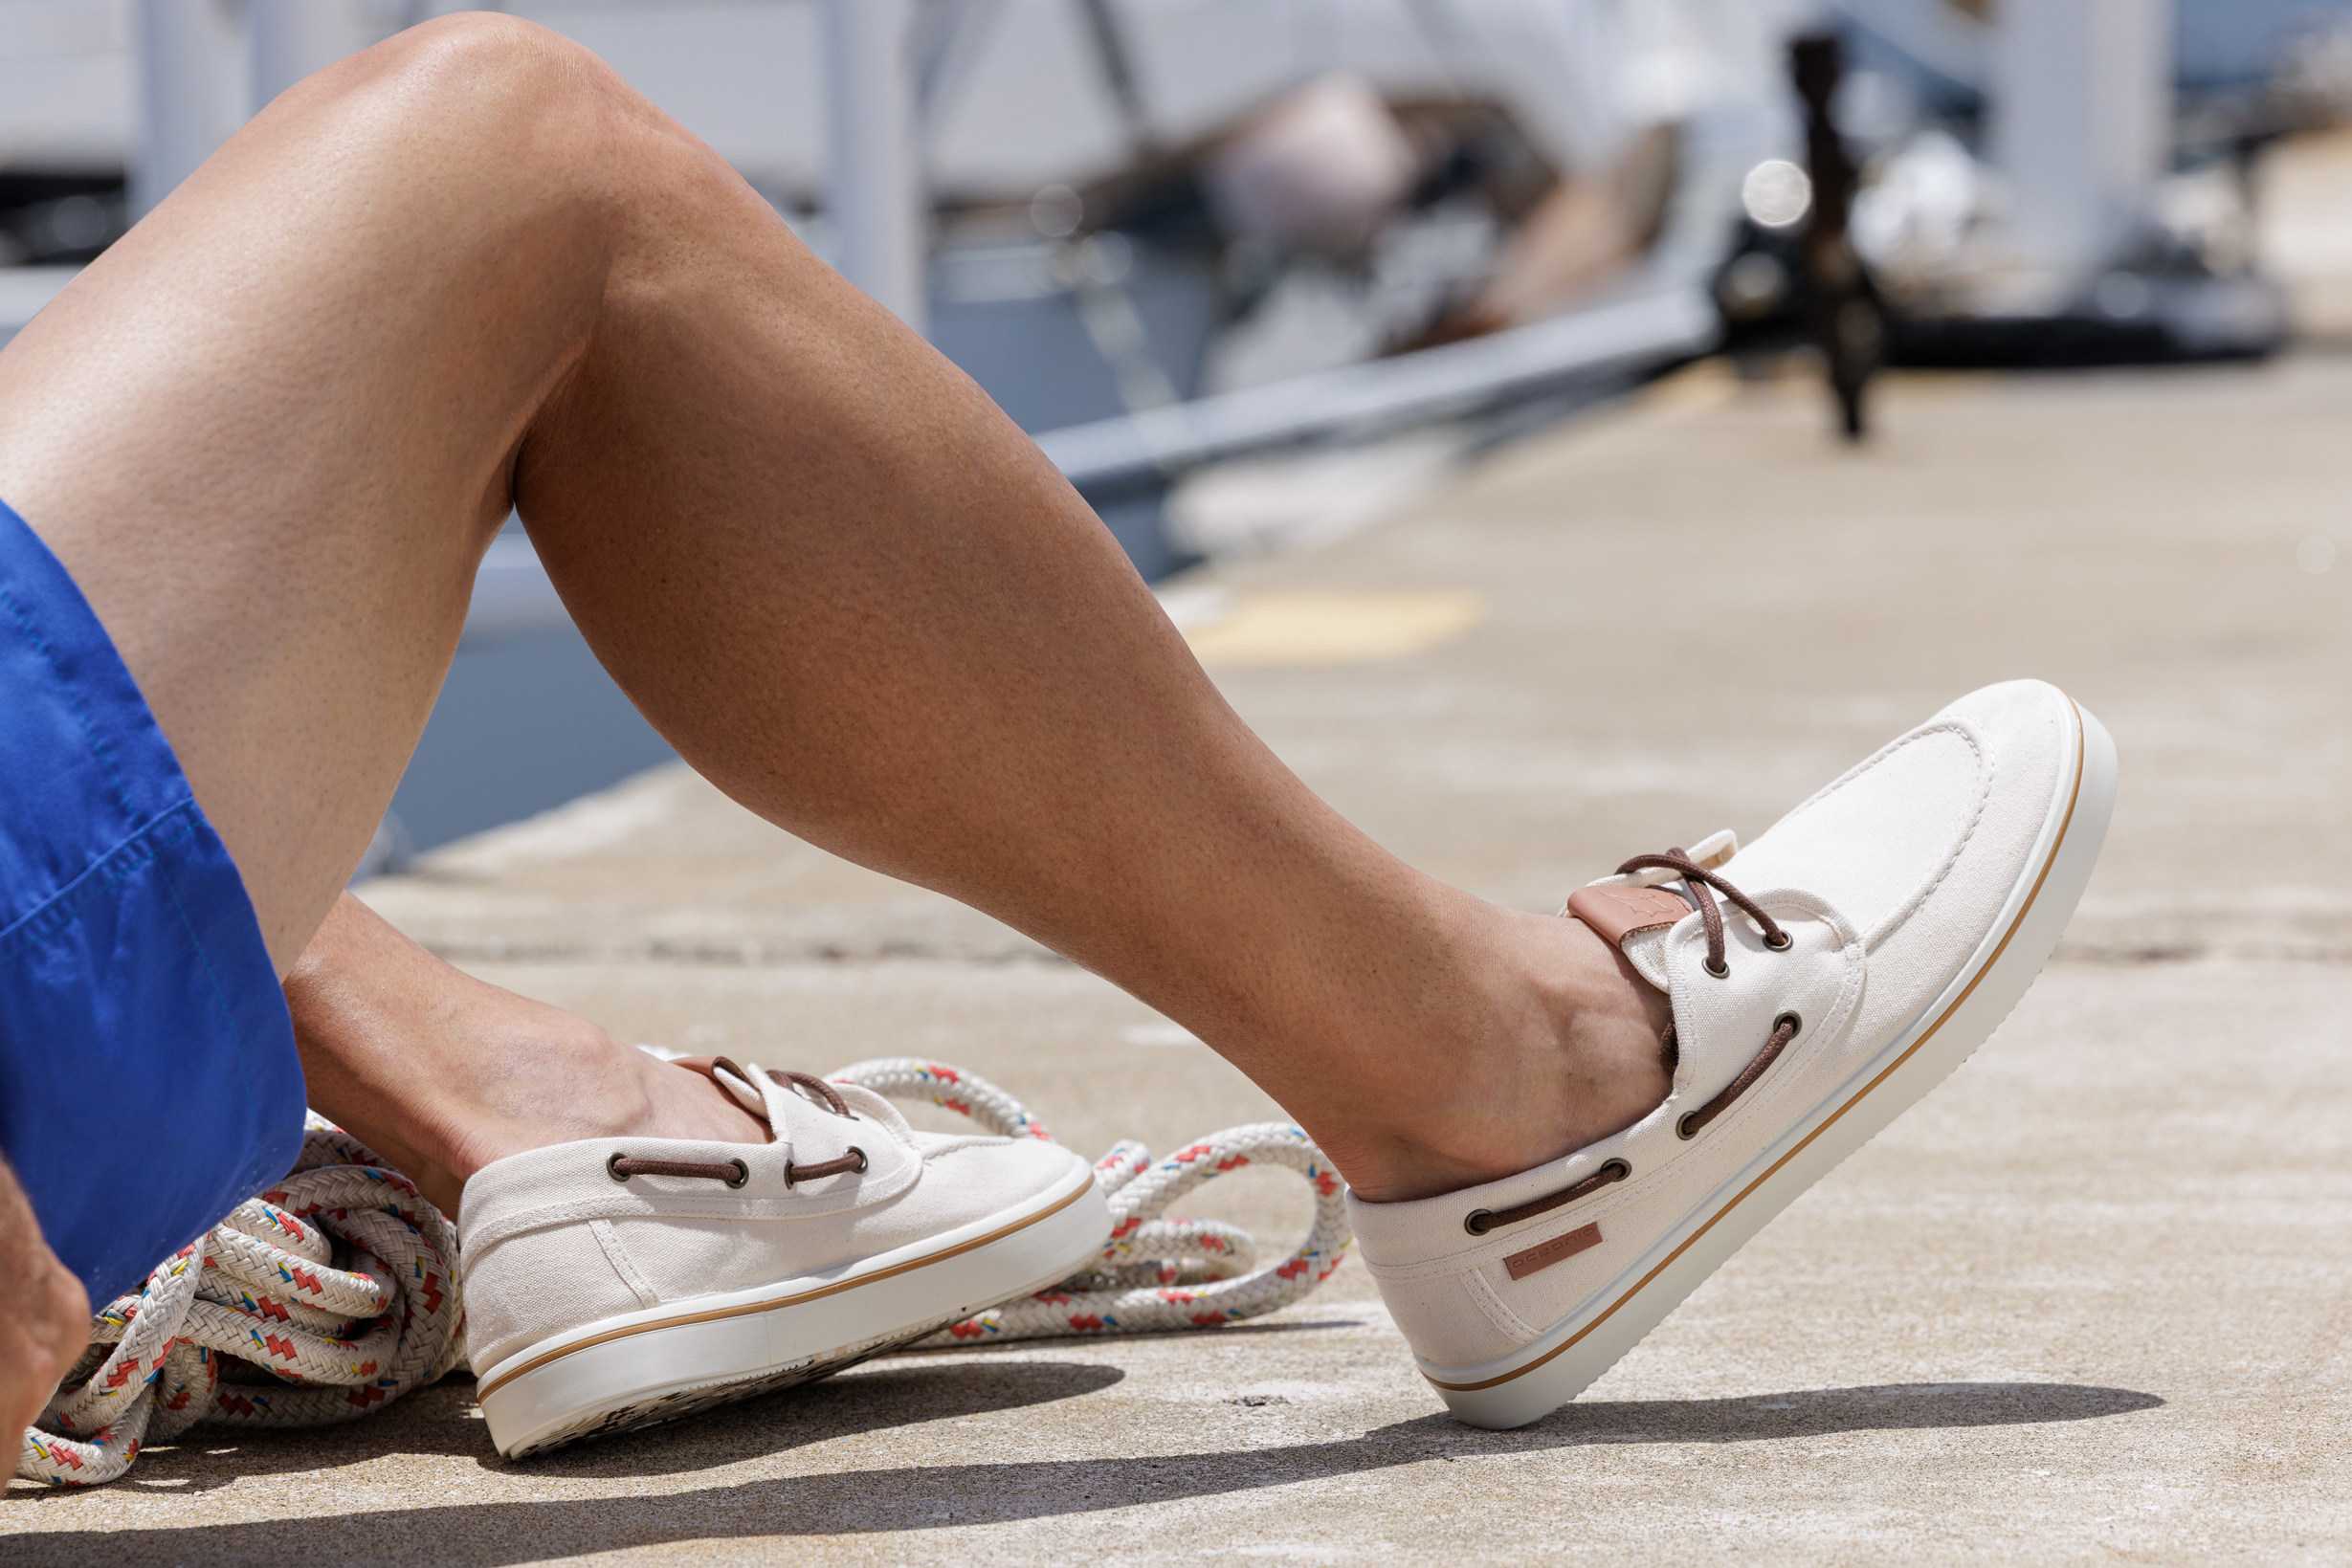 OCEANIA launches eco-friendly footwear line